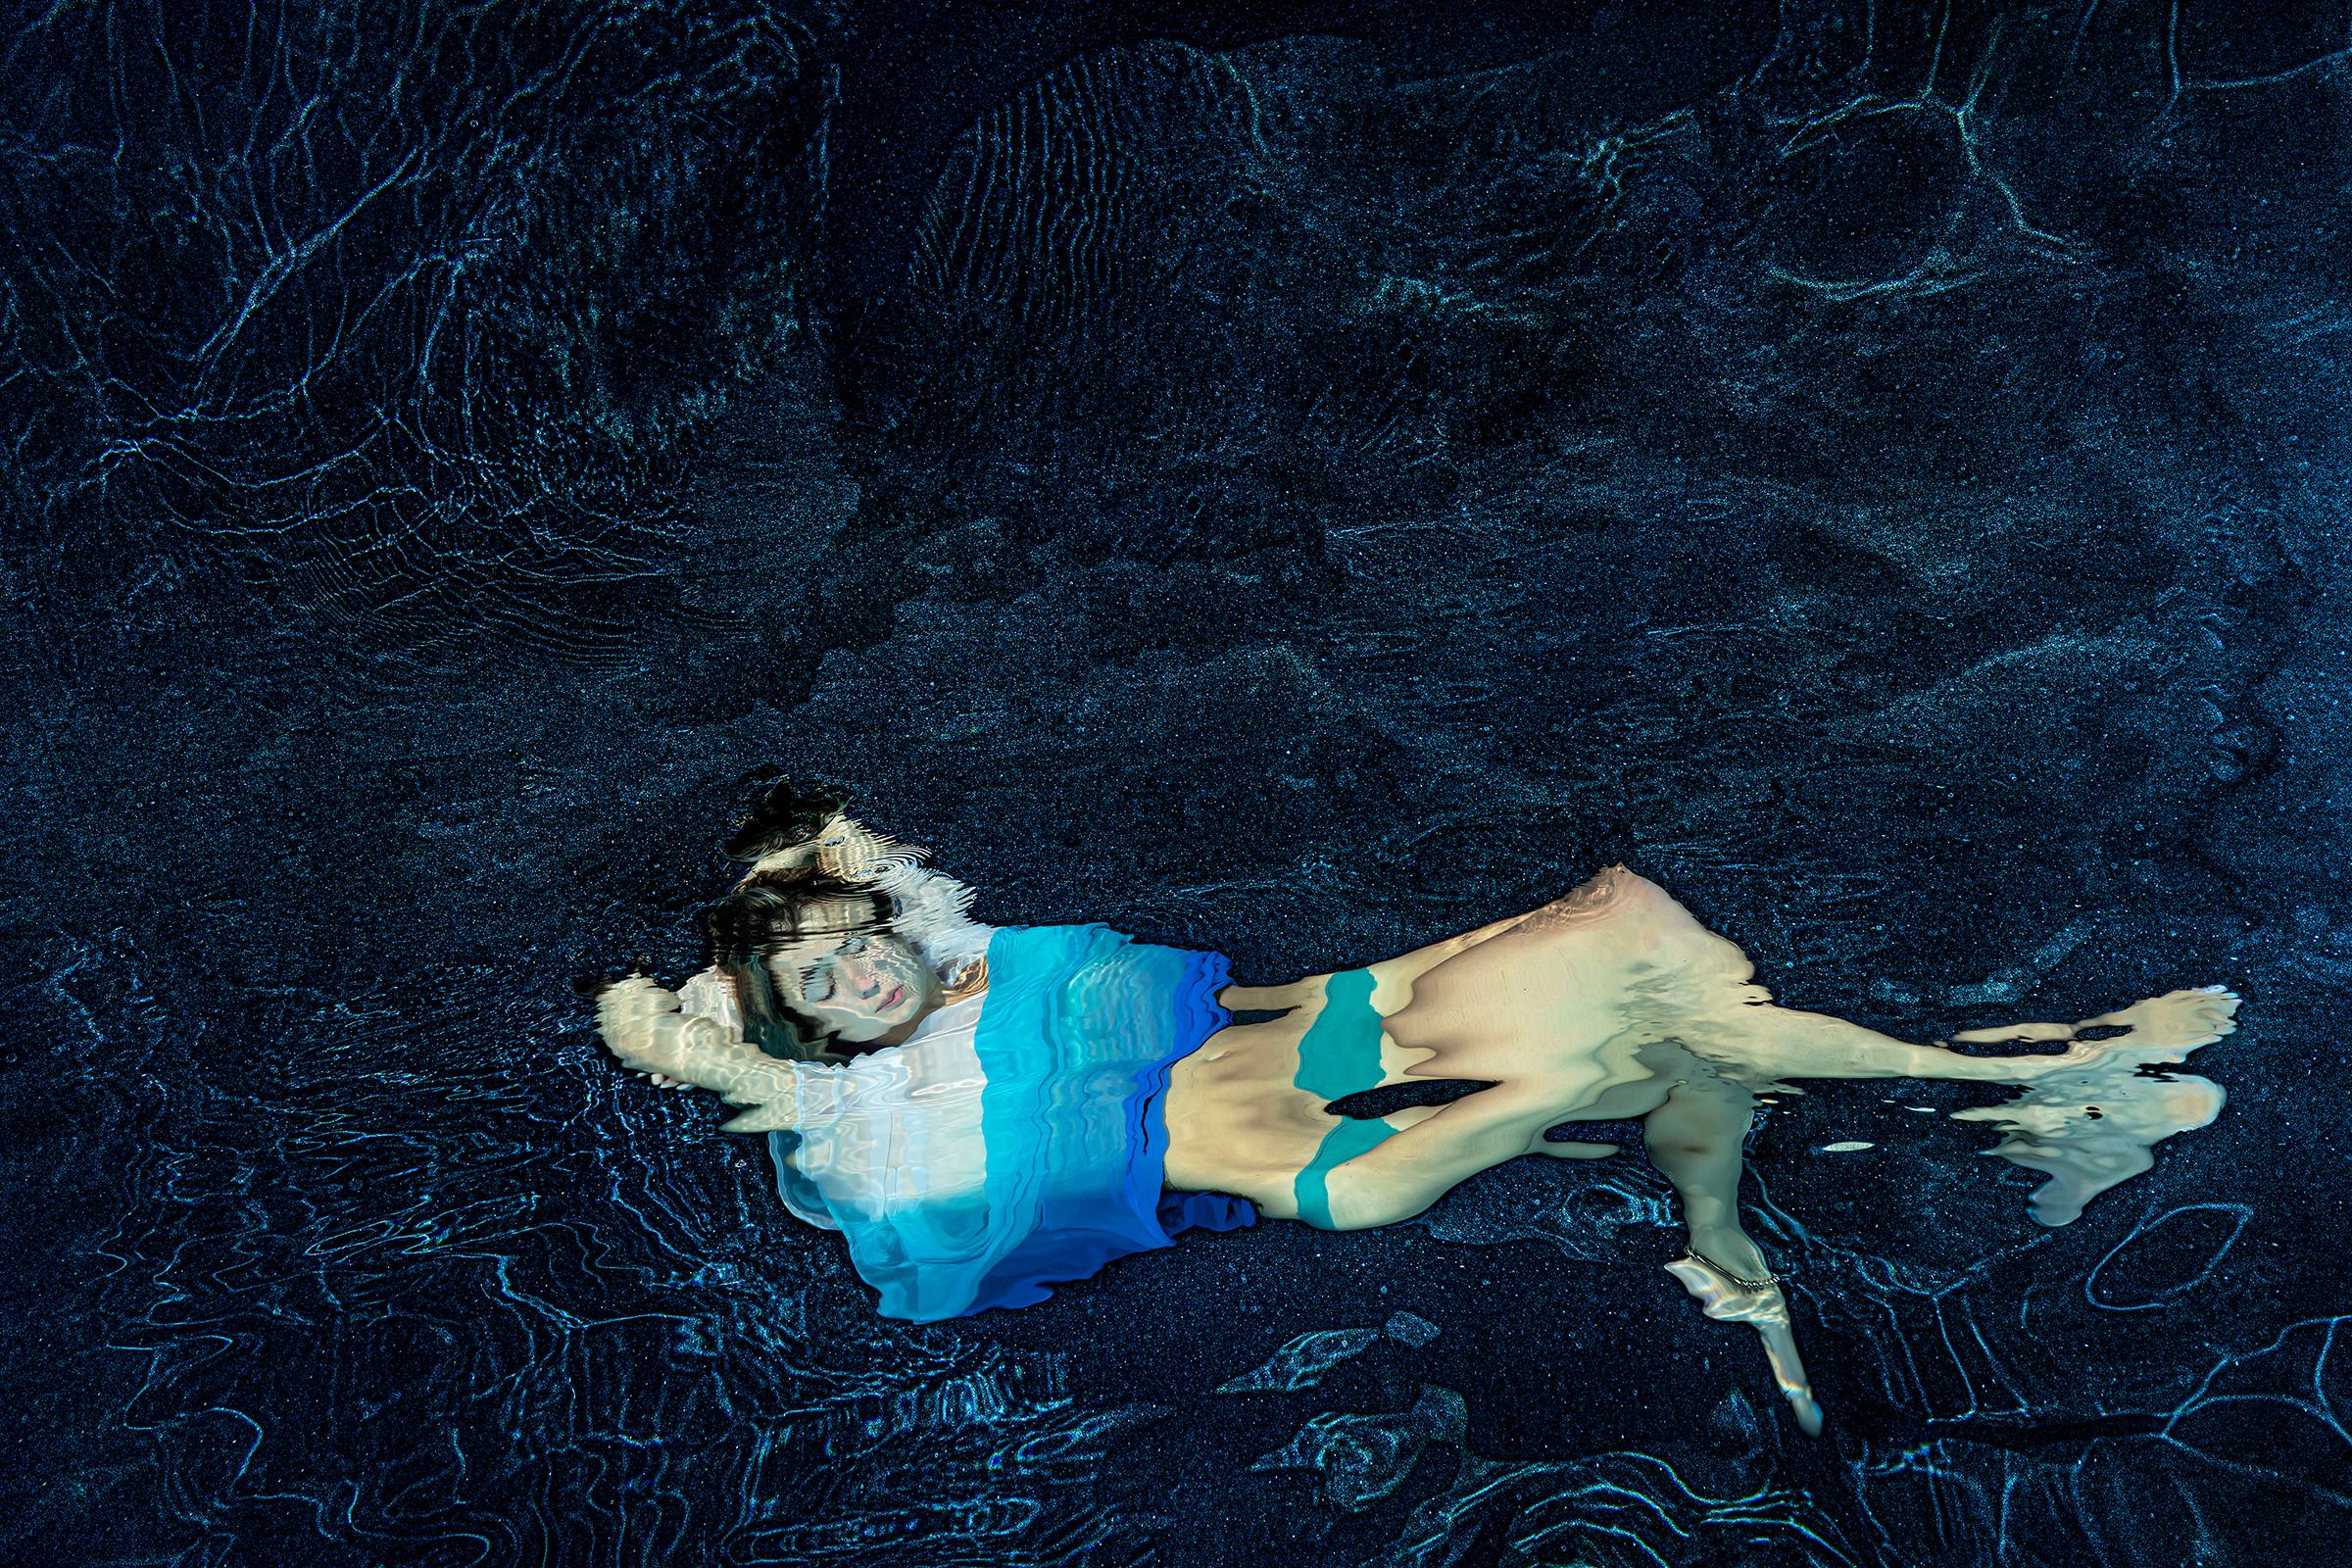 Alex Sher Color Photograph - Anesthesia - underwater photograph series REFLECTIONS - archival pigment 43x64"